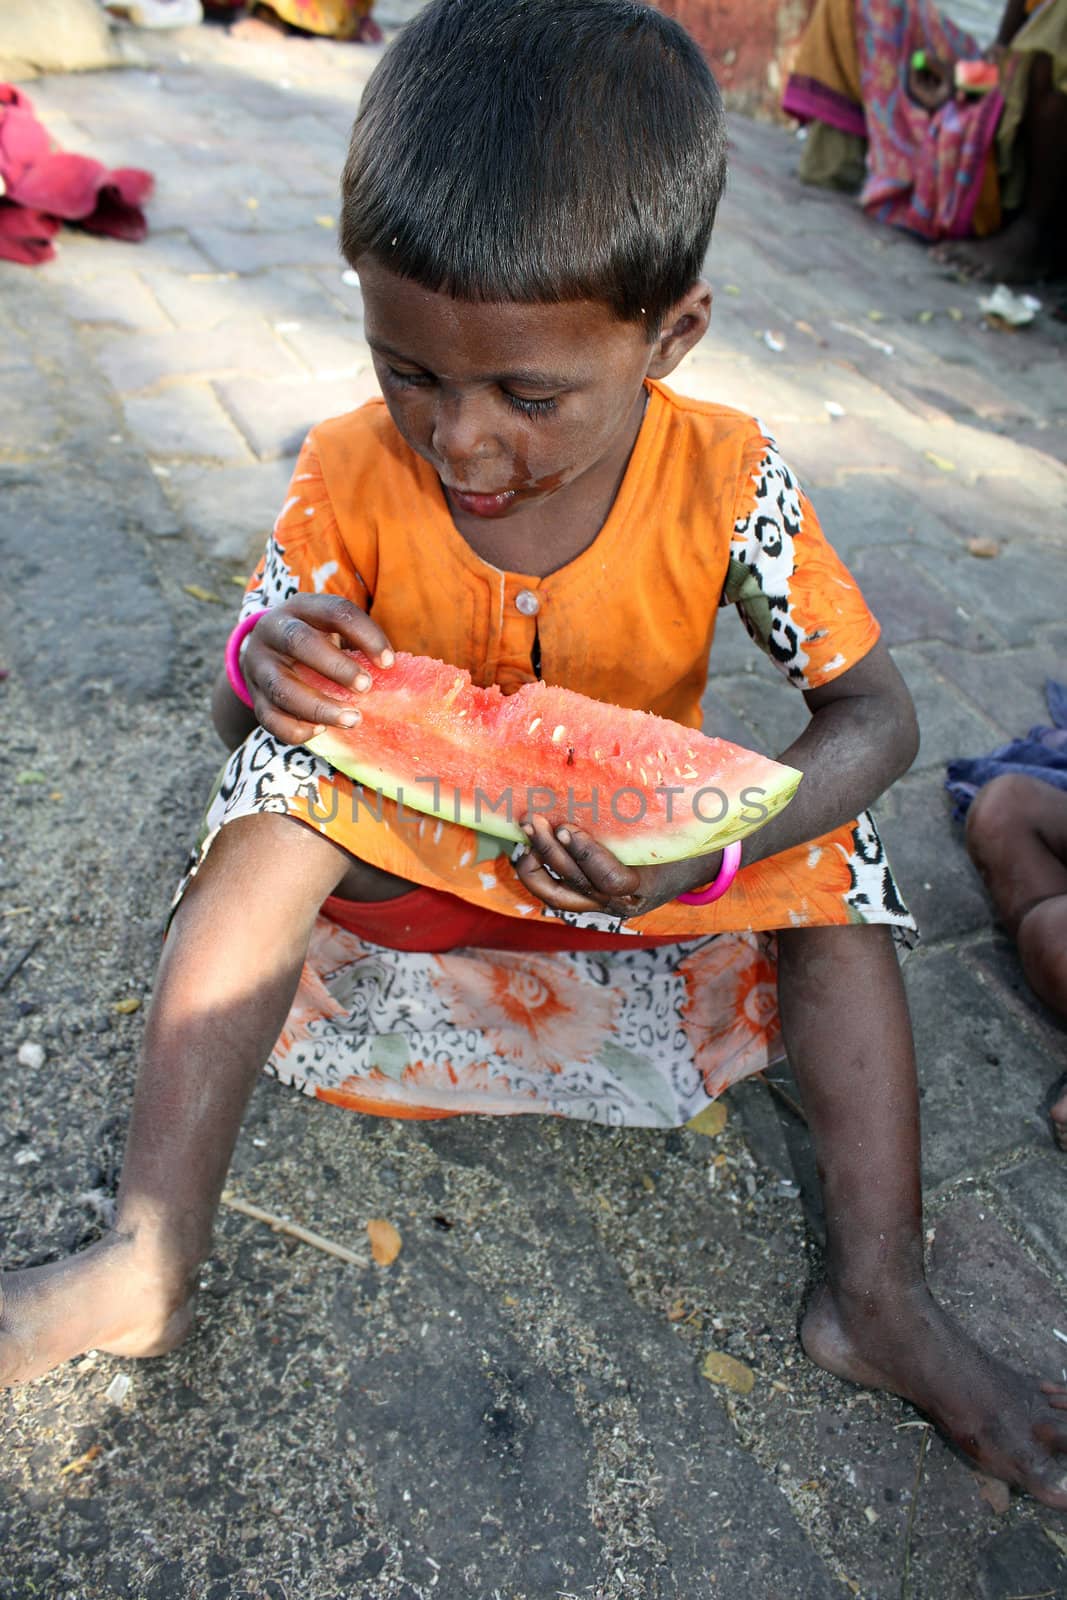 A hungry beggar girl from India eating a watermelon, sitting on a street.